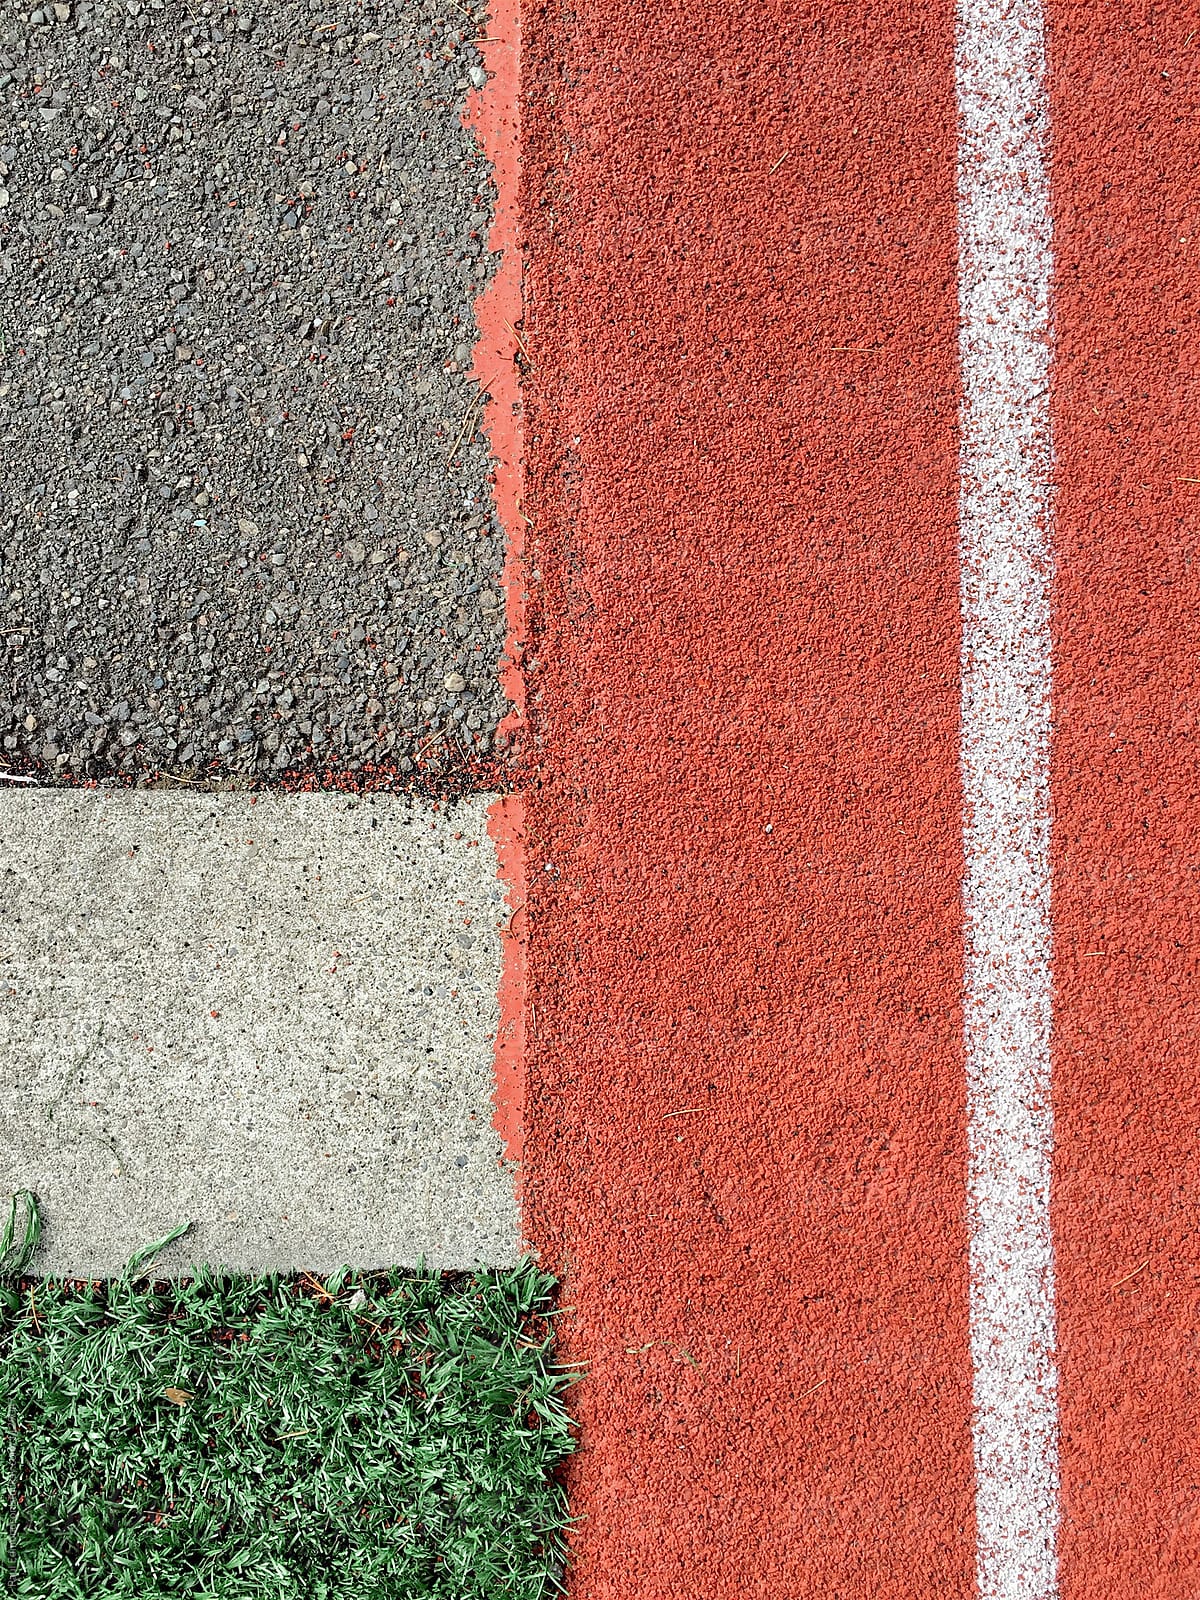 Close up of athletic field boundary lines and artificial turf